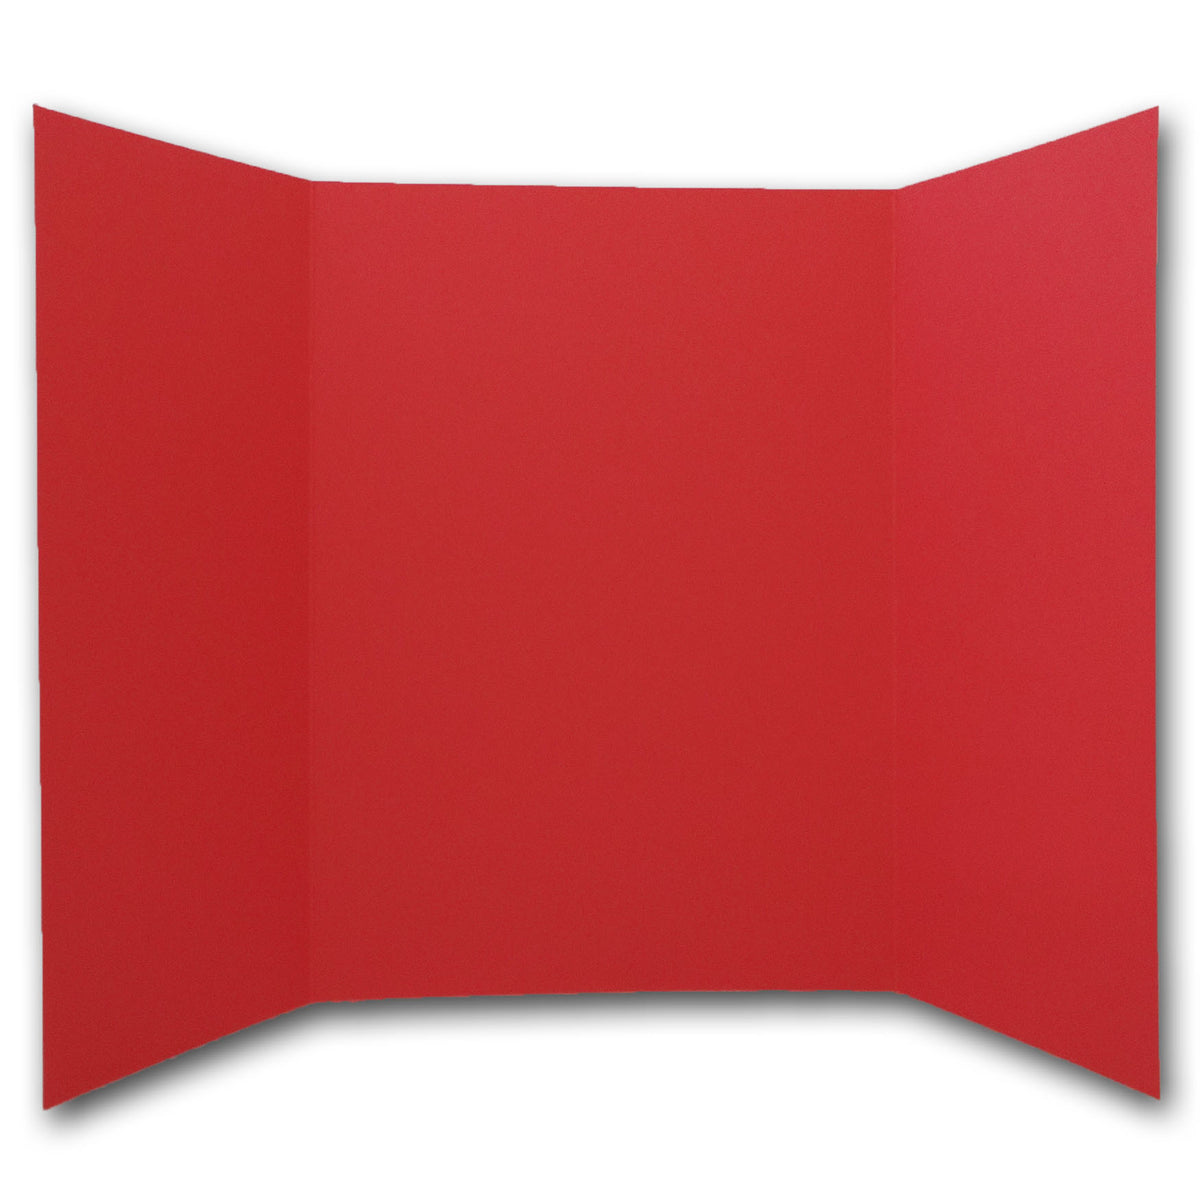 Red 5x7 Gate Fold Discount Card Stock for DIY Invitations